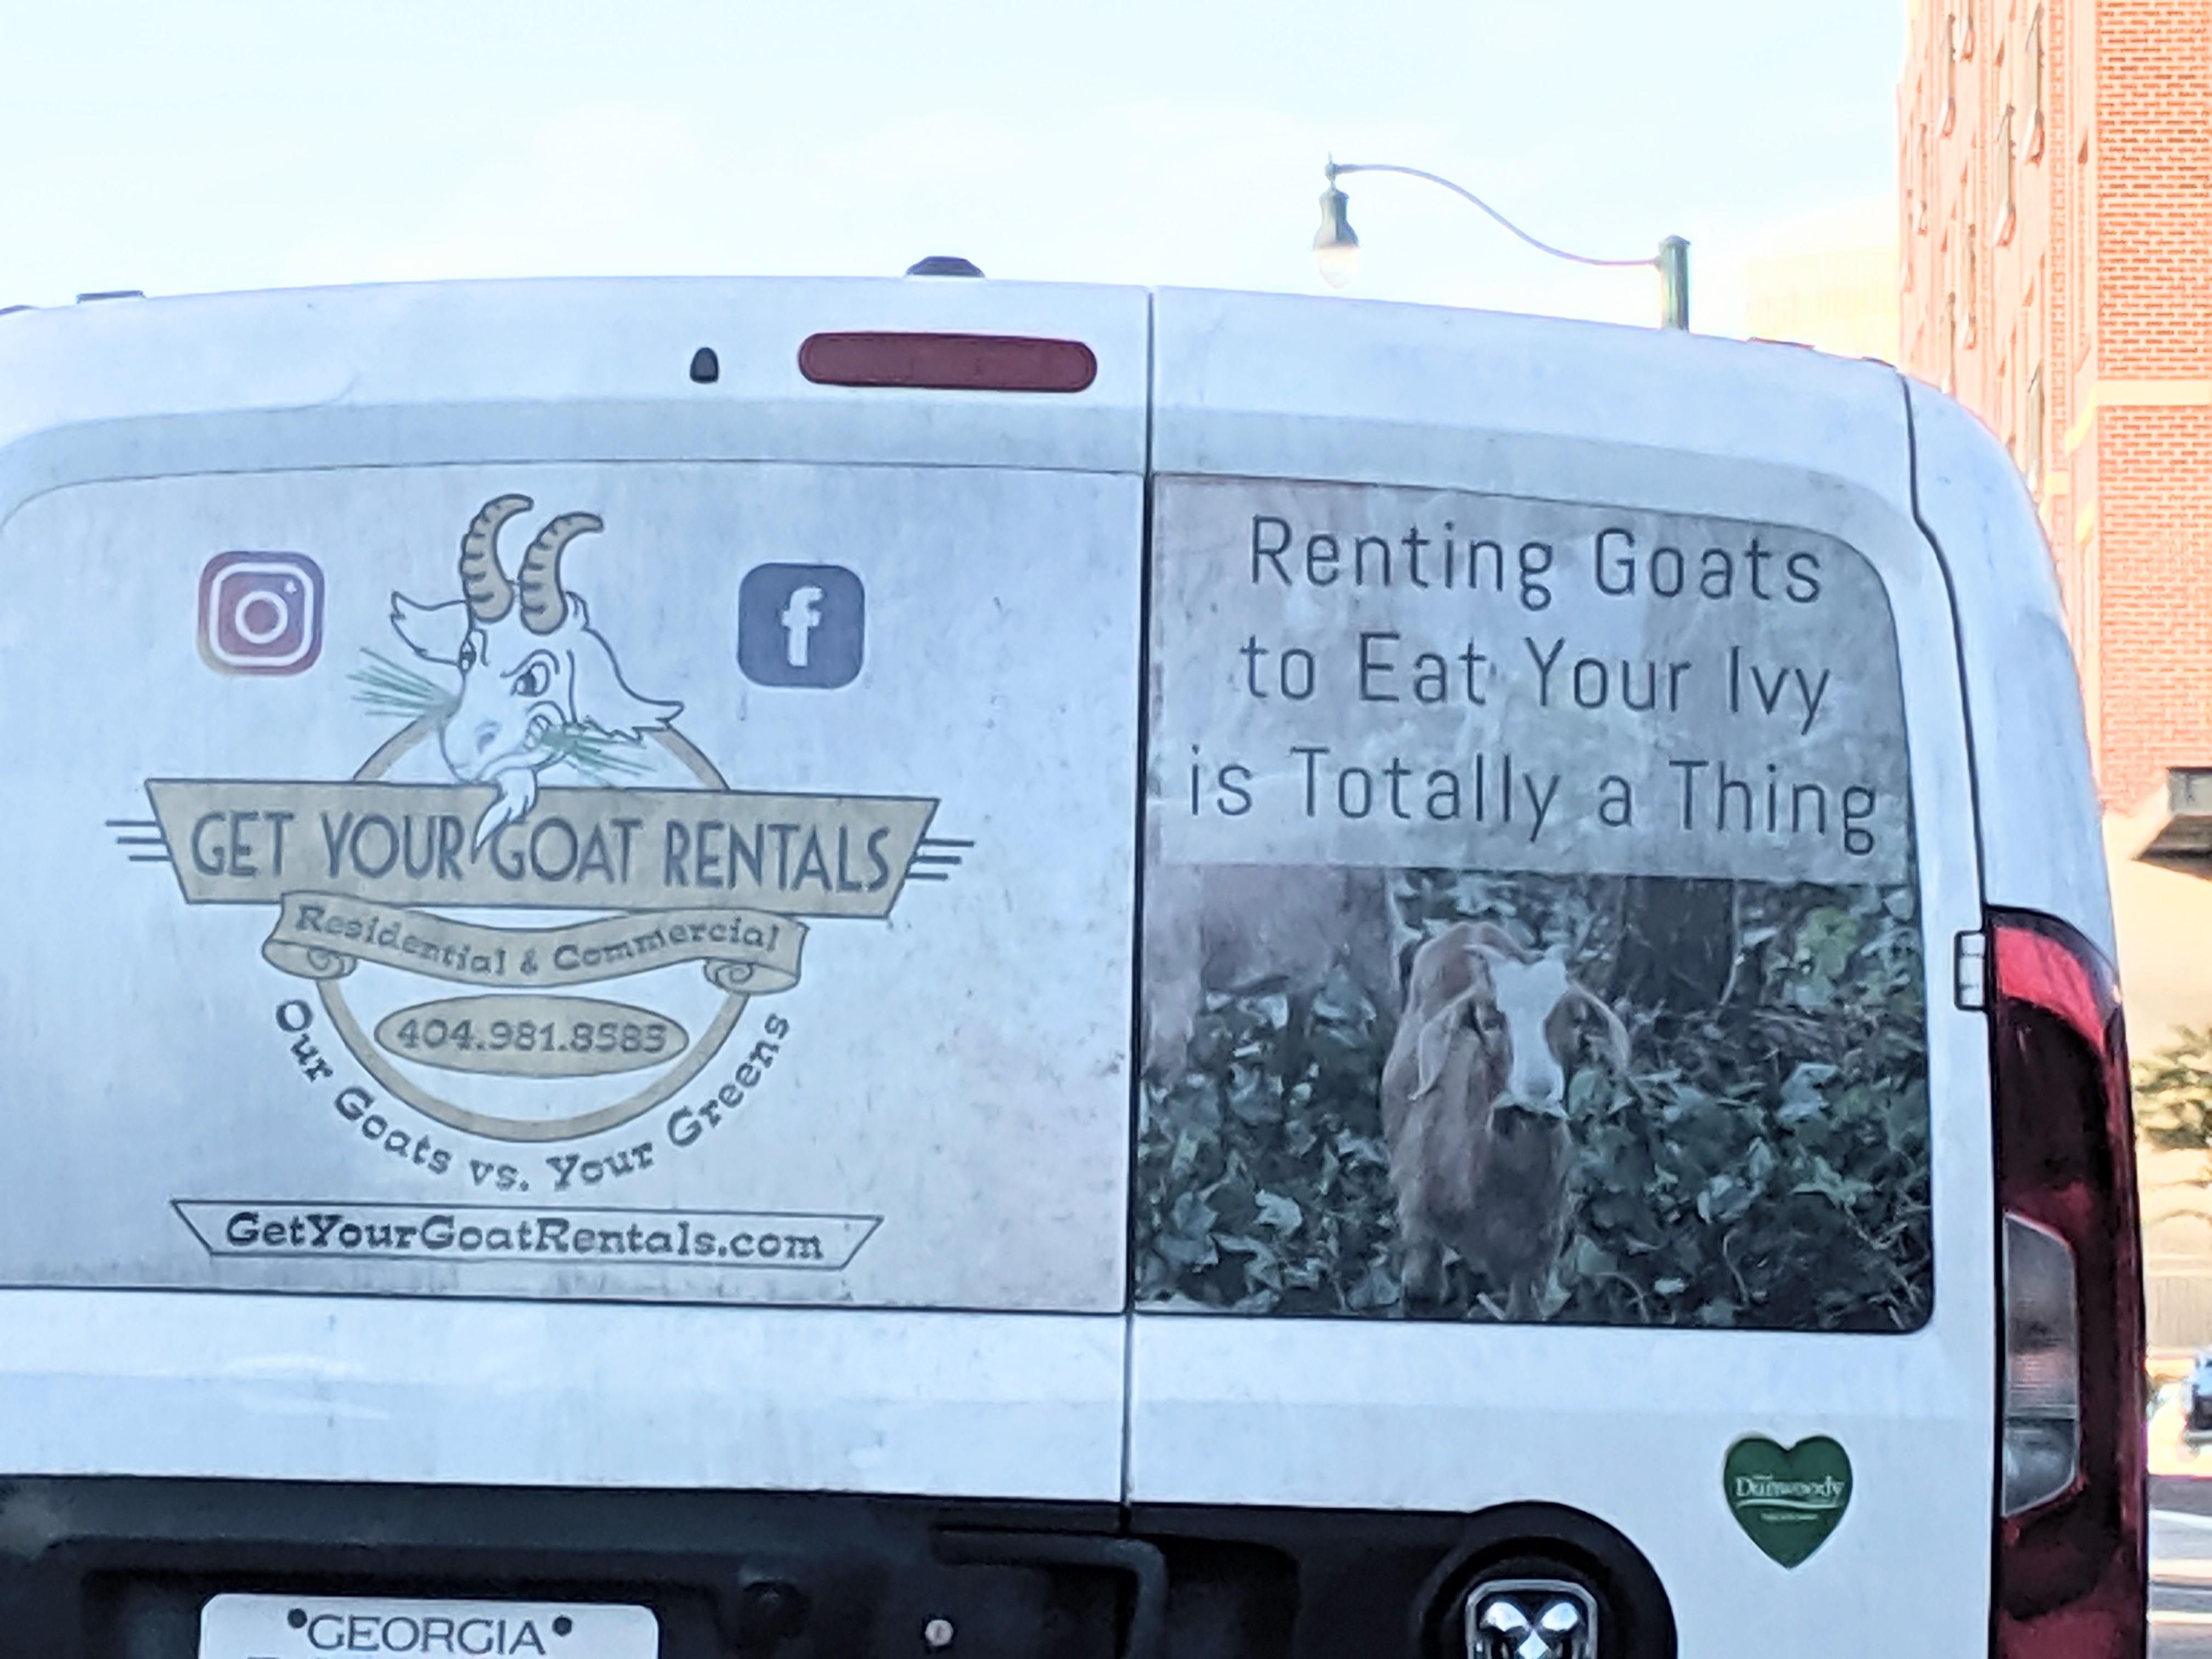 "Renting goats to eat your Ivy is totally a thing"